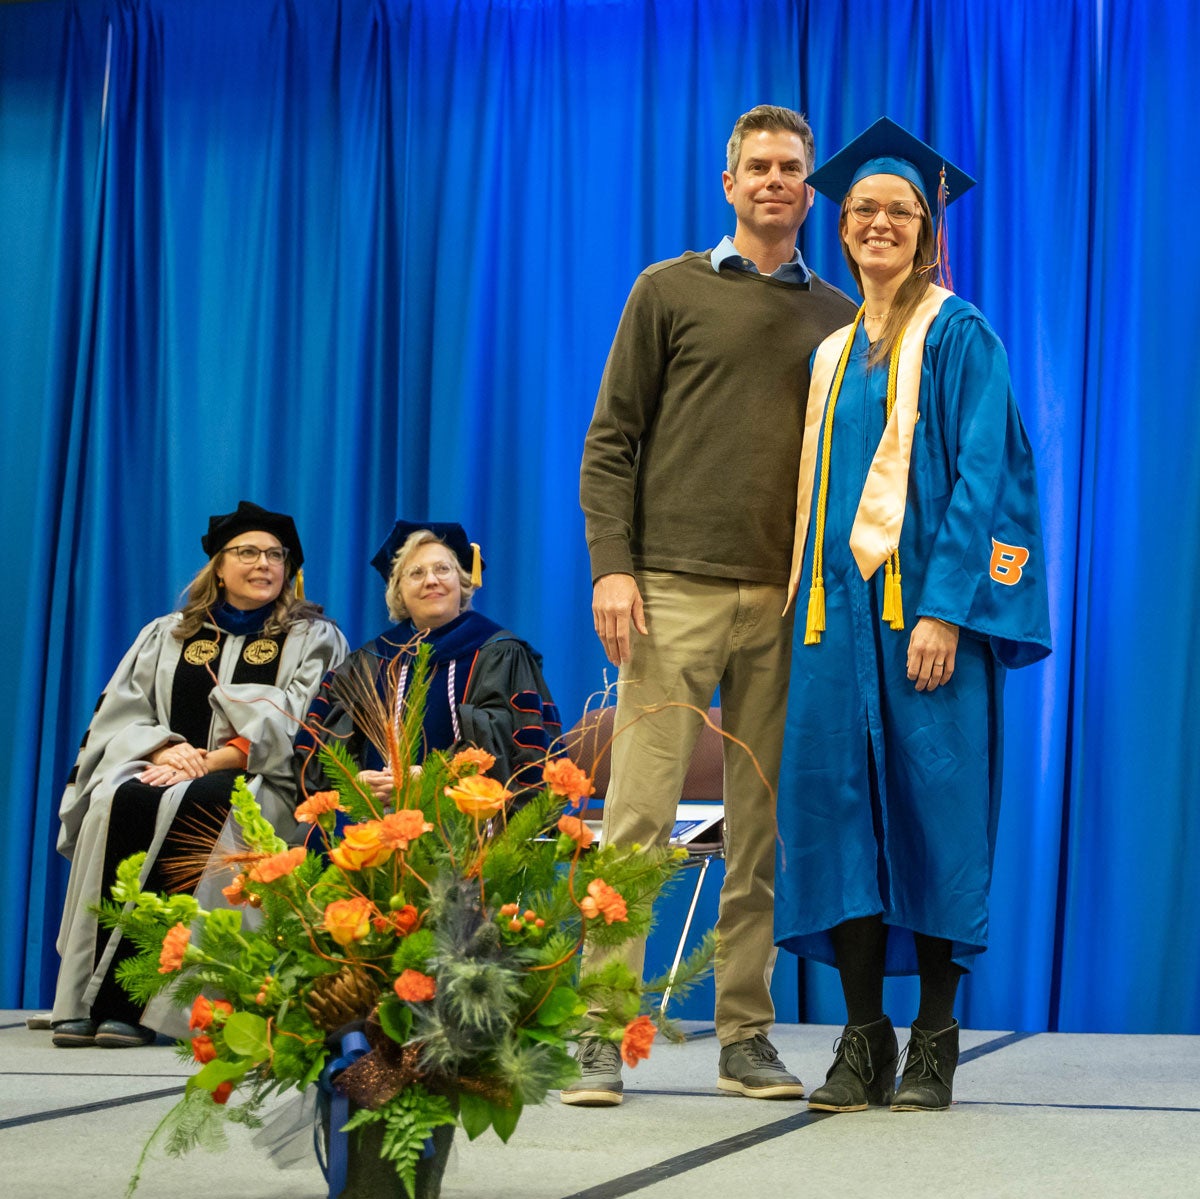 Quatraro and her husband stand on stage during Convocation. School of Nursing Deans sit in the background.